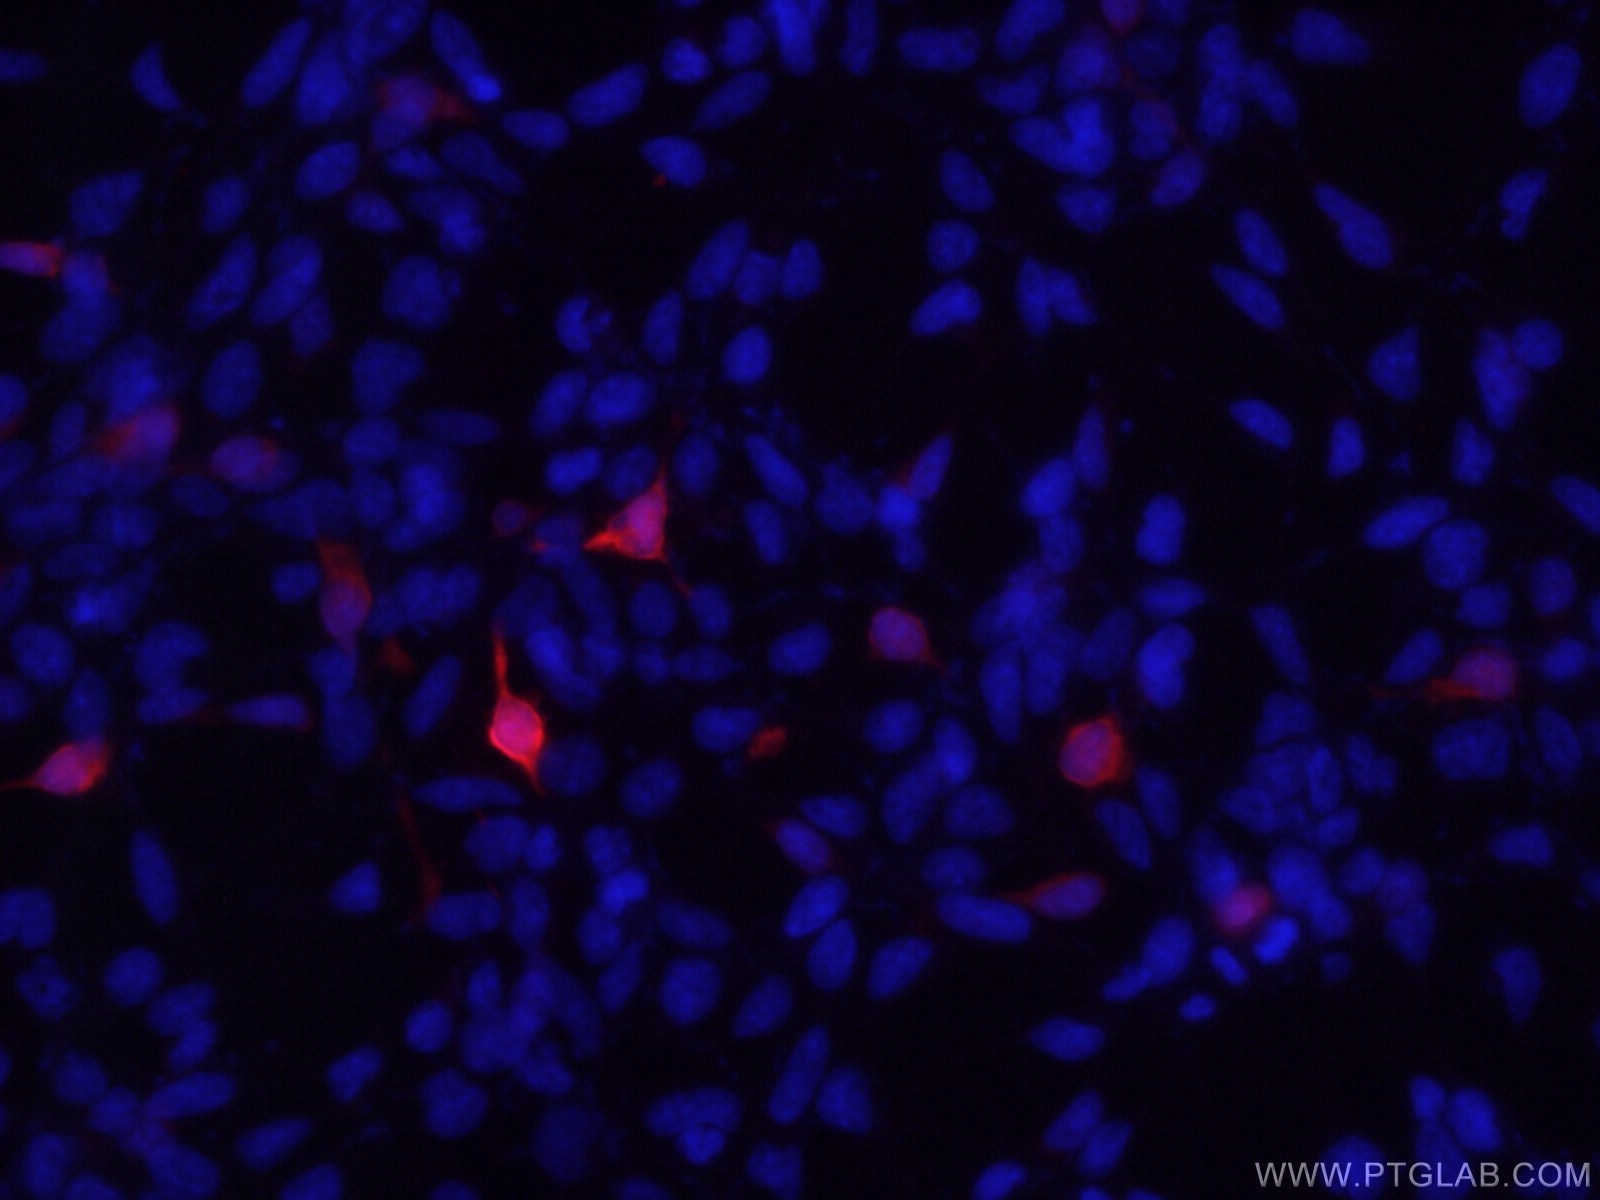 Immunofluorescence (IF) / fluorescent staining of Transfected HEK-293 cells using DYKDDDDK tag Monoclonal antibody (Binds to FLAG® t (66008-3-Ig)